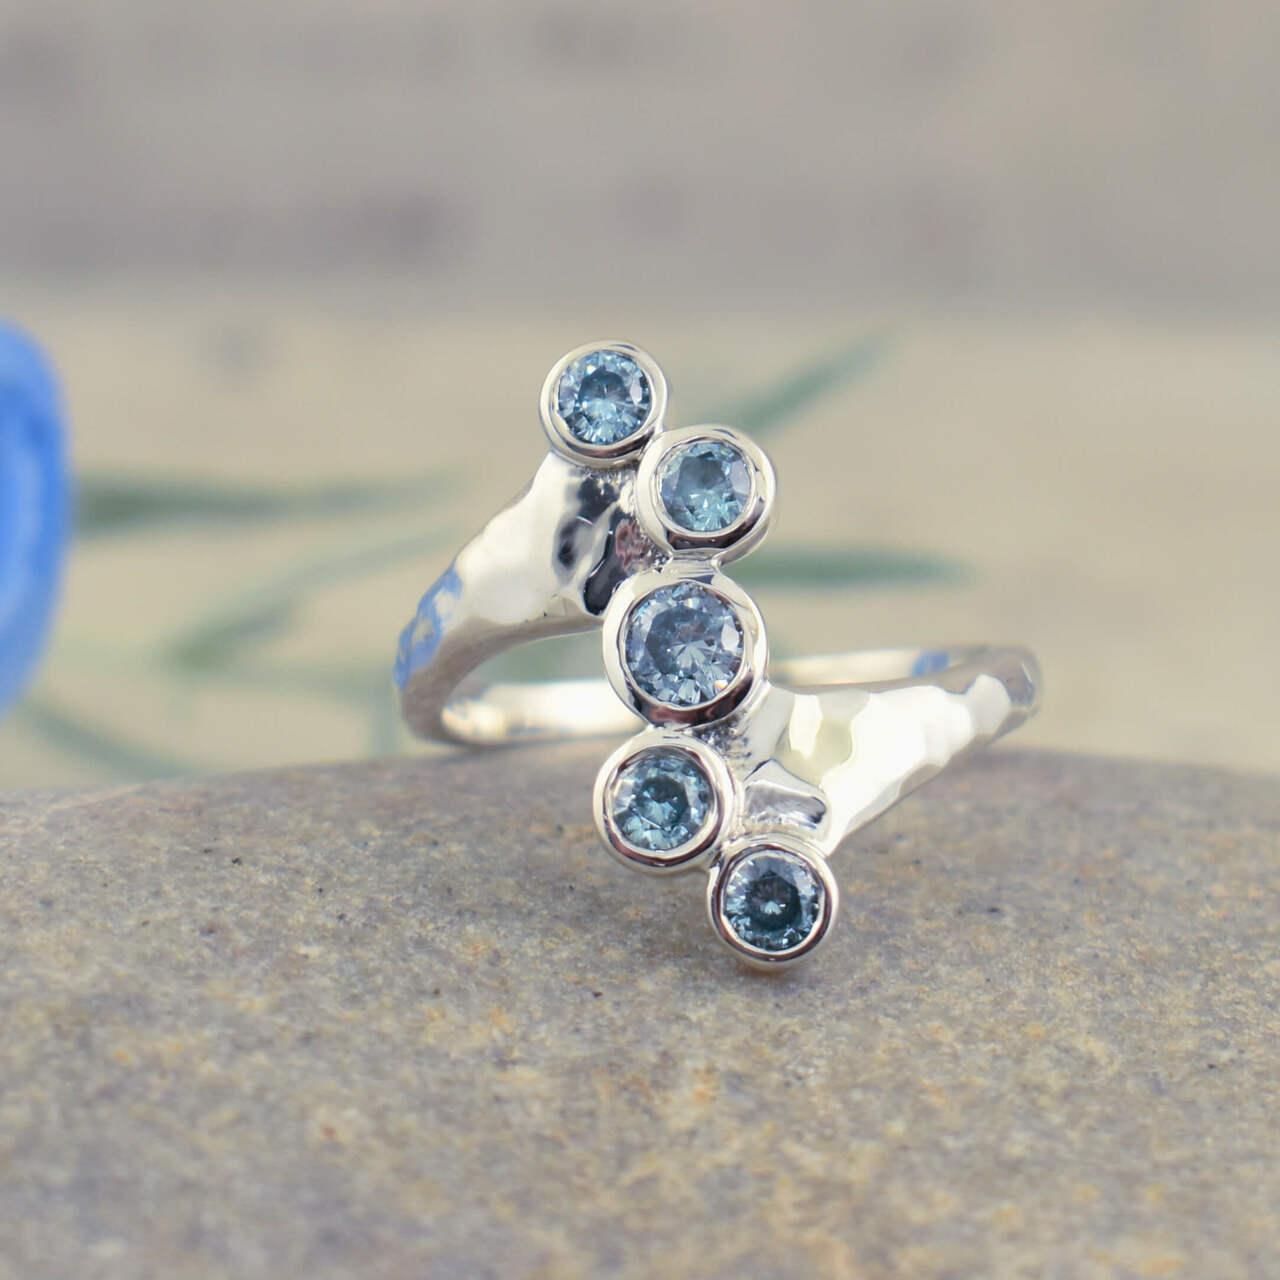 Handcrafted sterling silver hammered band ring with sky blue cubic zirconia stones